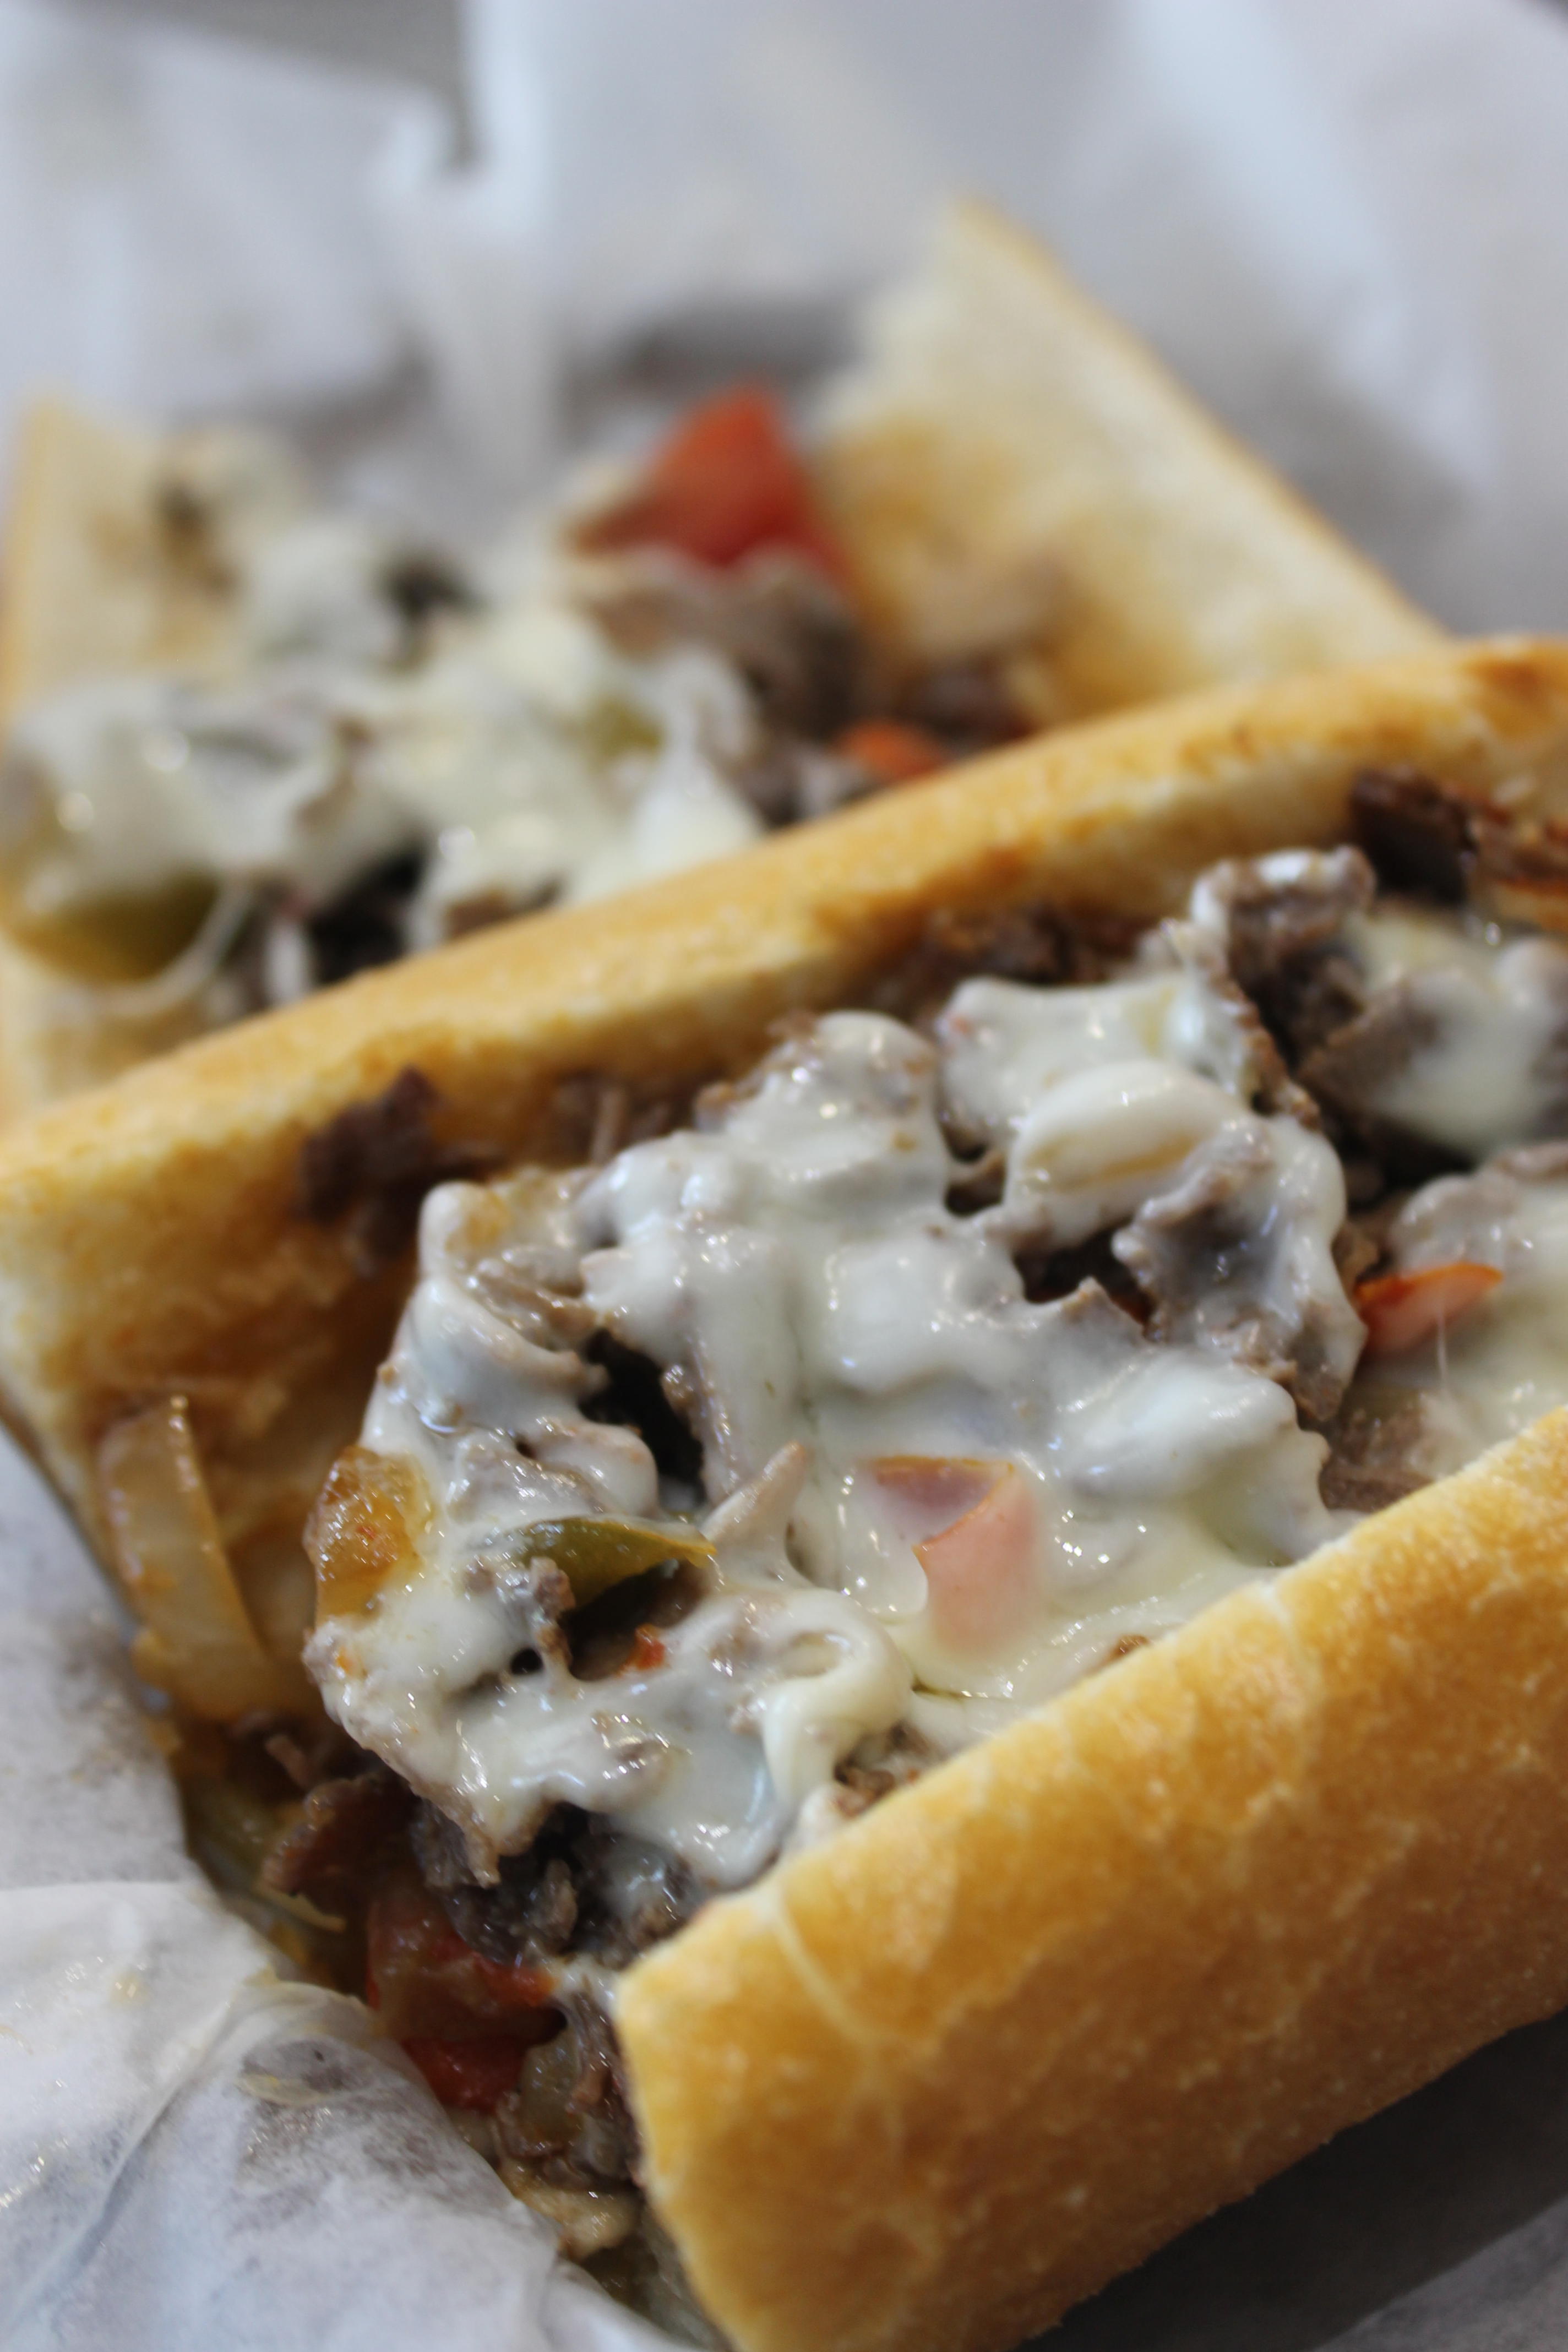 One of our famous cheesesteaks